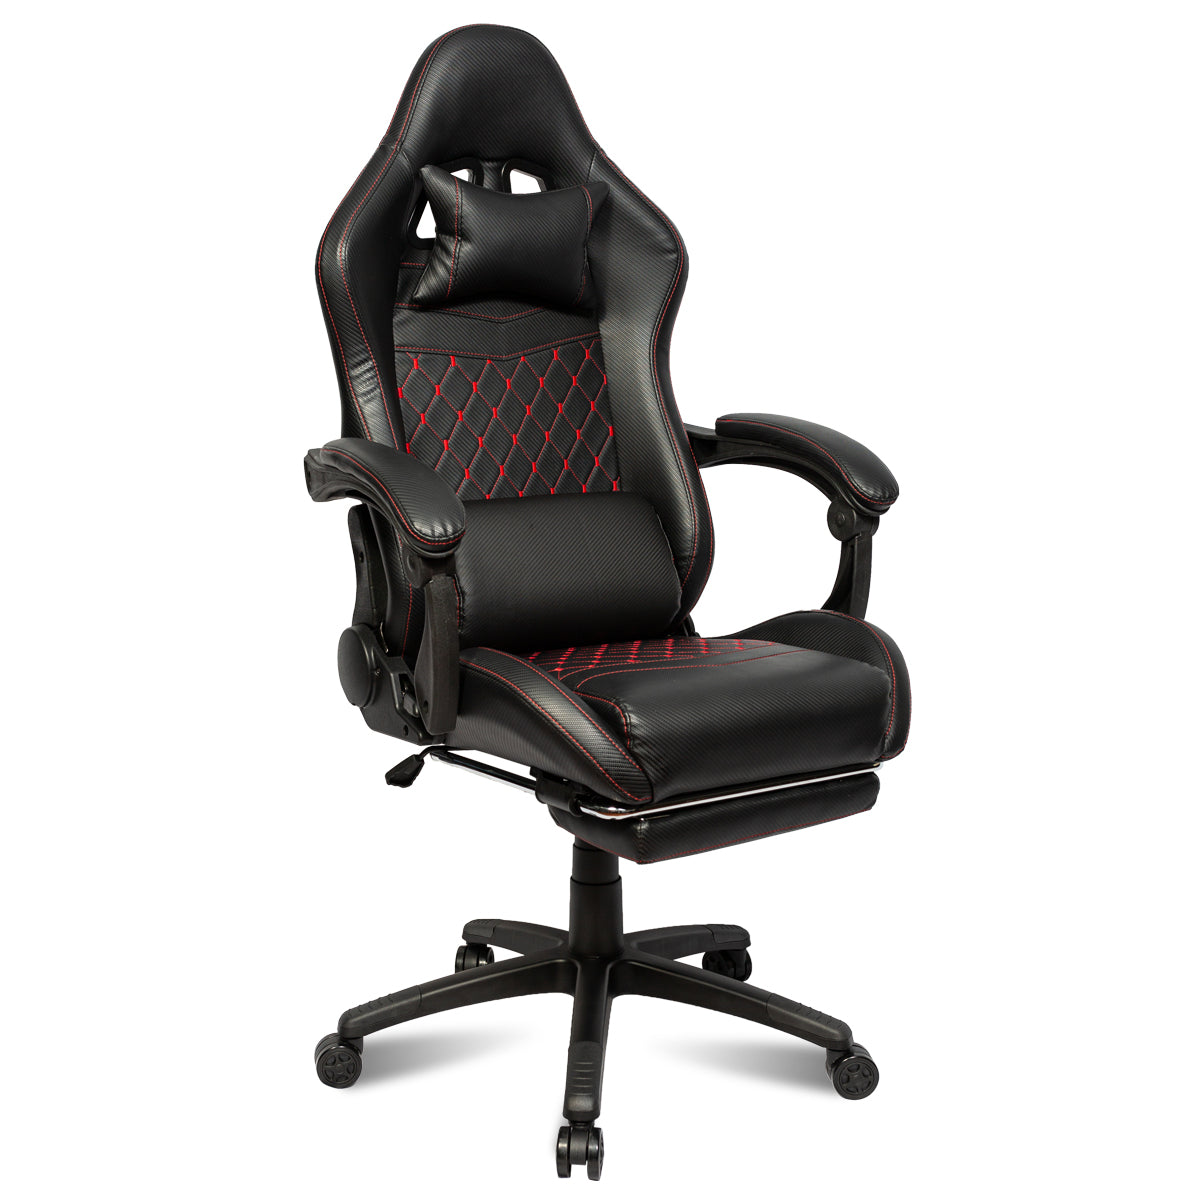 RaDEWAY Gaming Office Chairs 155 Degree Reclining Computer Chair Comfortable Executive Computer Seating Racer Recliner